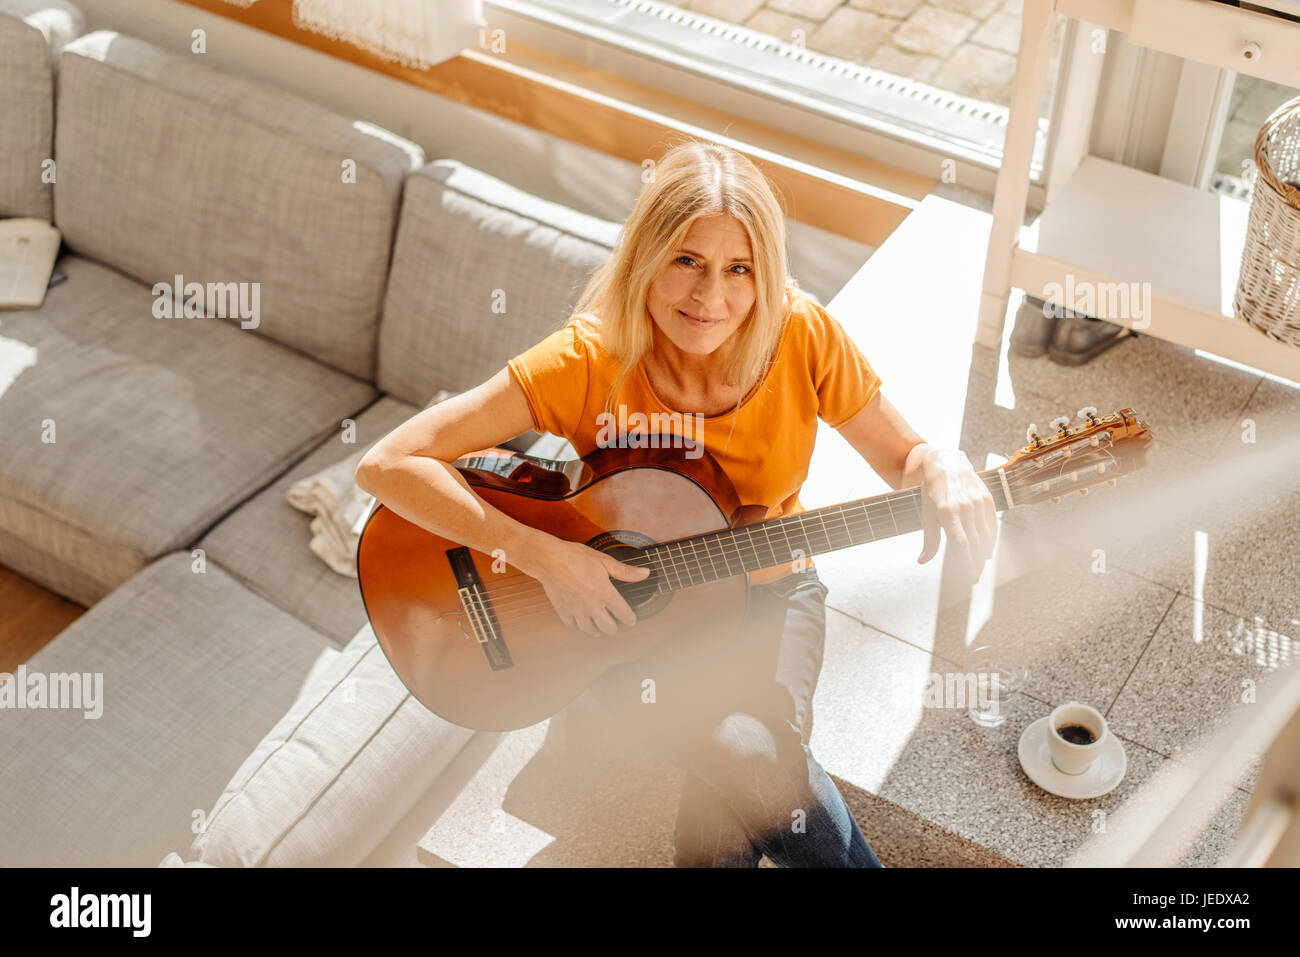 Woman at home playing guitar Stock Photo